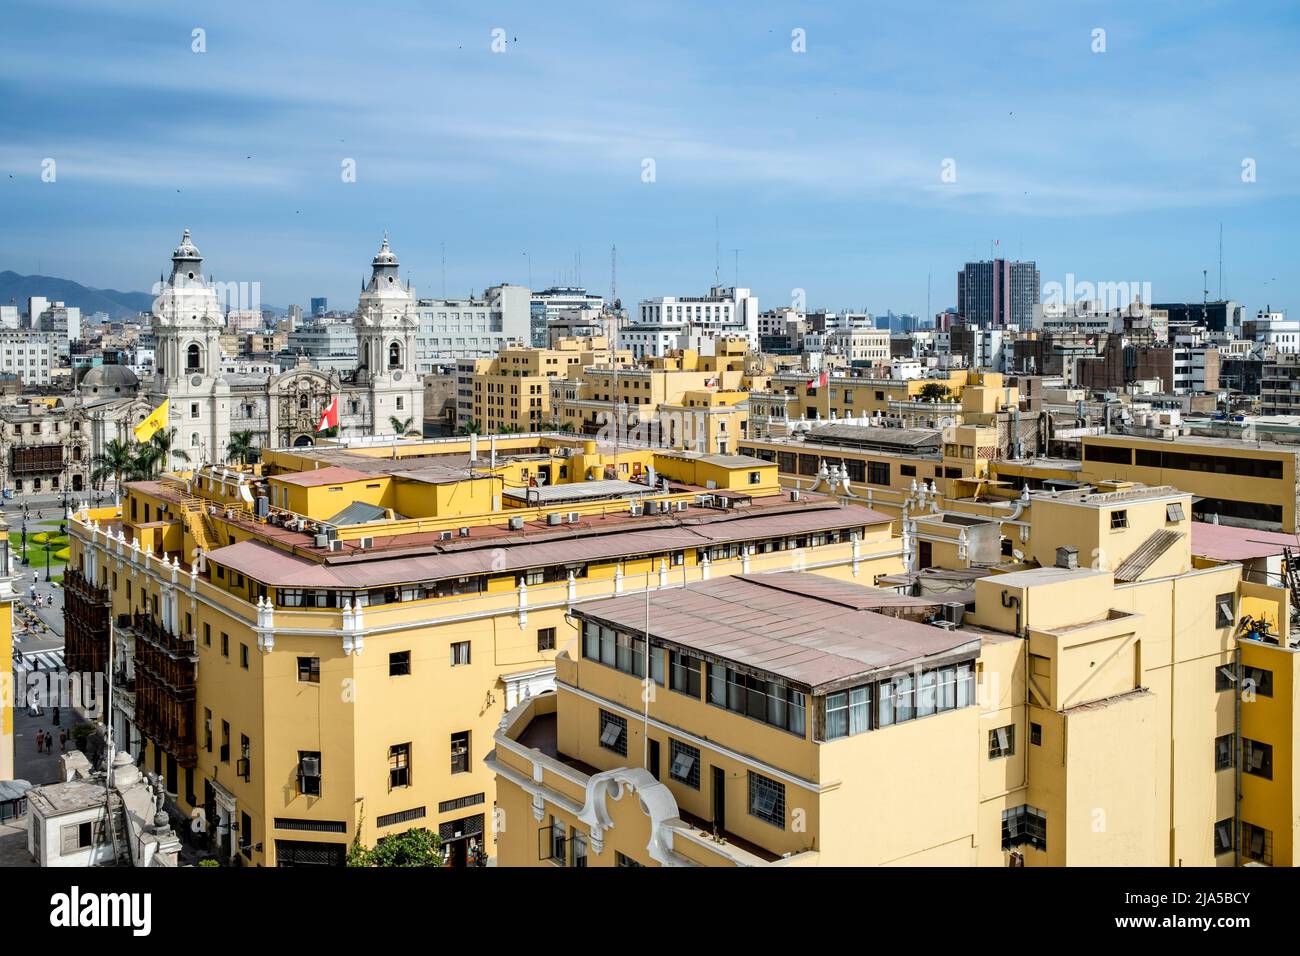 A View Of The Lima Skyline Towards The Plaza De Armas From The Bell Tower Of The Santo Domingo Convent, Lima, Peru. Stock Photo